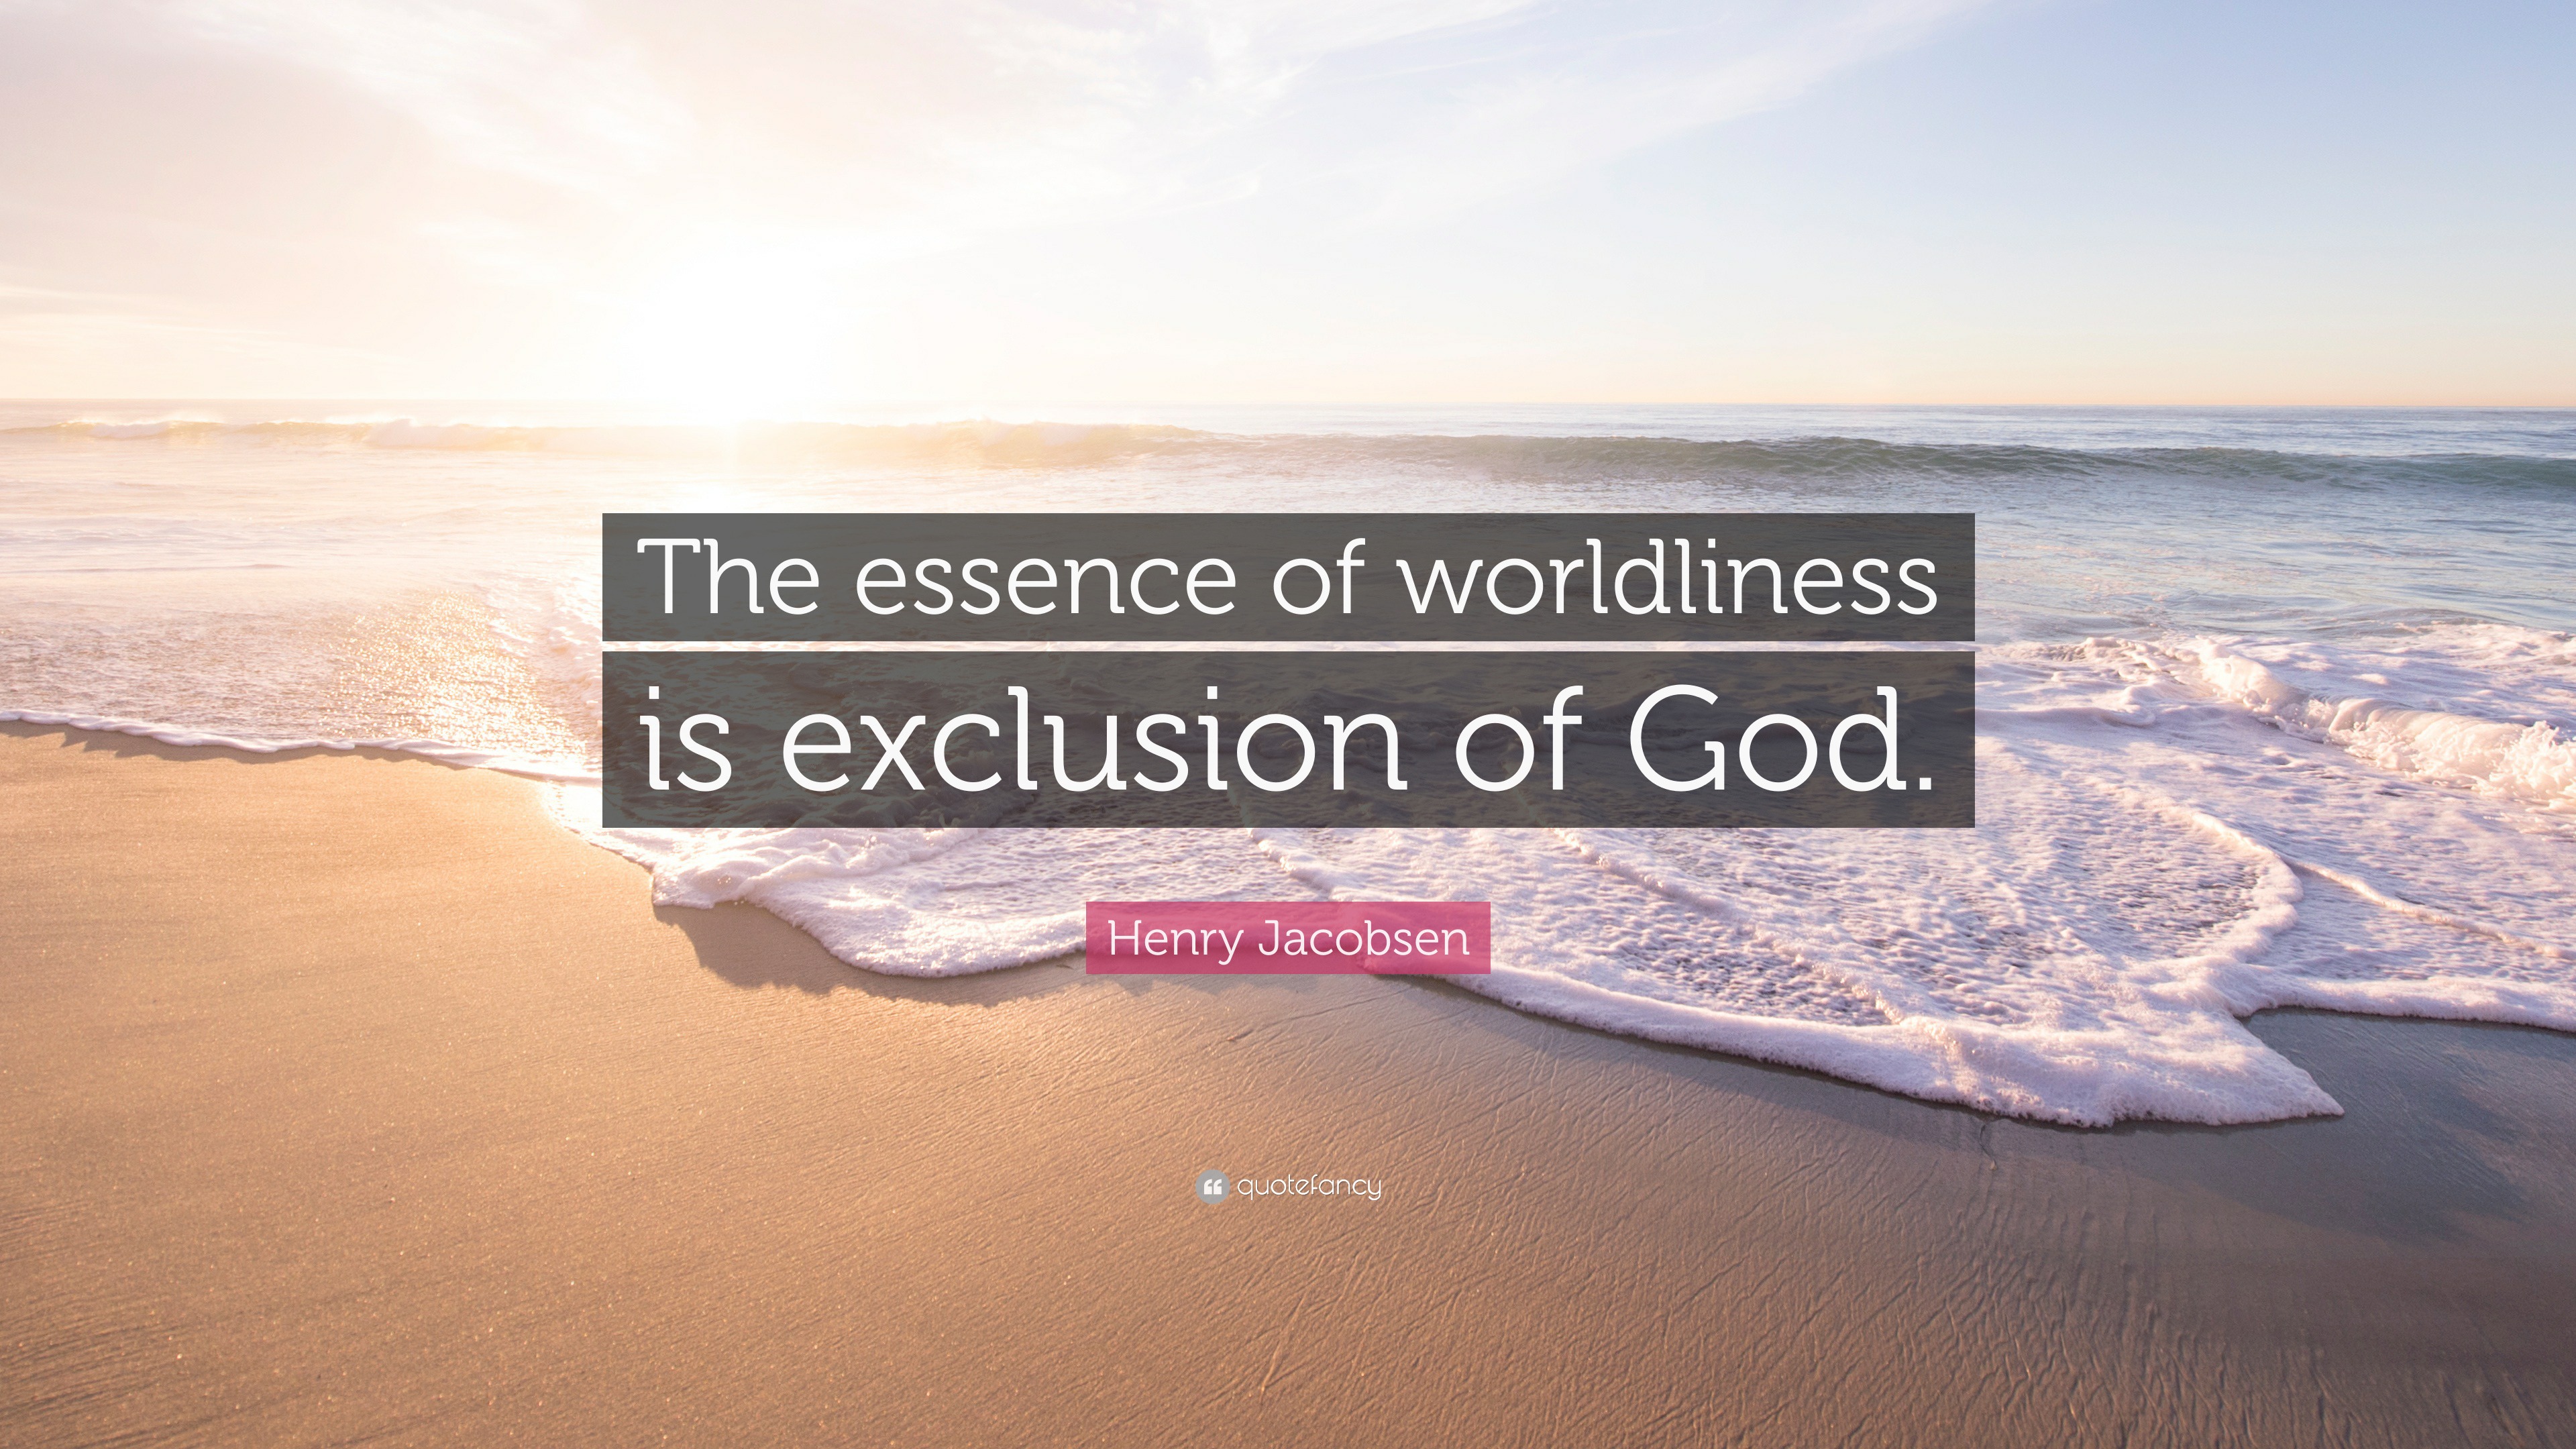 Henry Jacobsen Quote: “The essence of worldliness is exclusion of